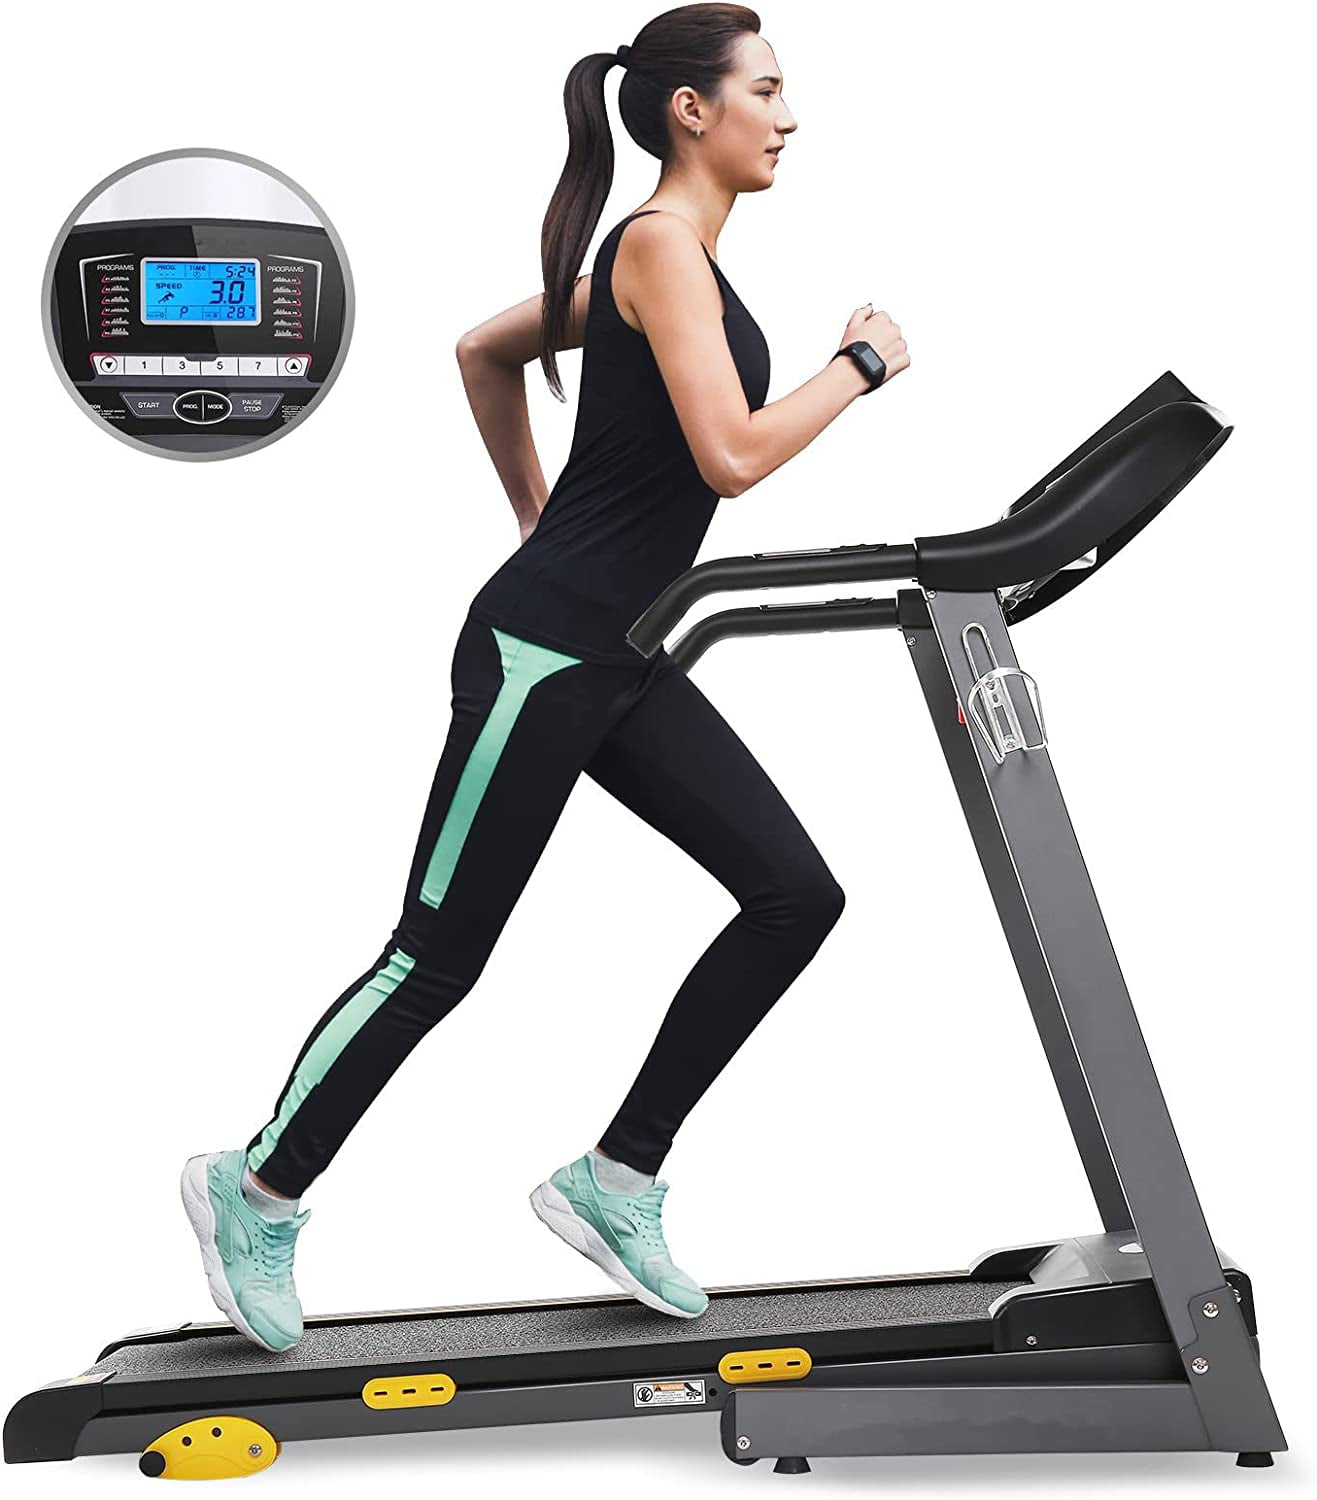 Details about   Folding Gym Treadmill Protect Cover Running Jogging Machine Dustproof Waterproof 